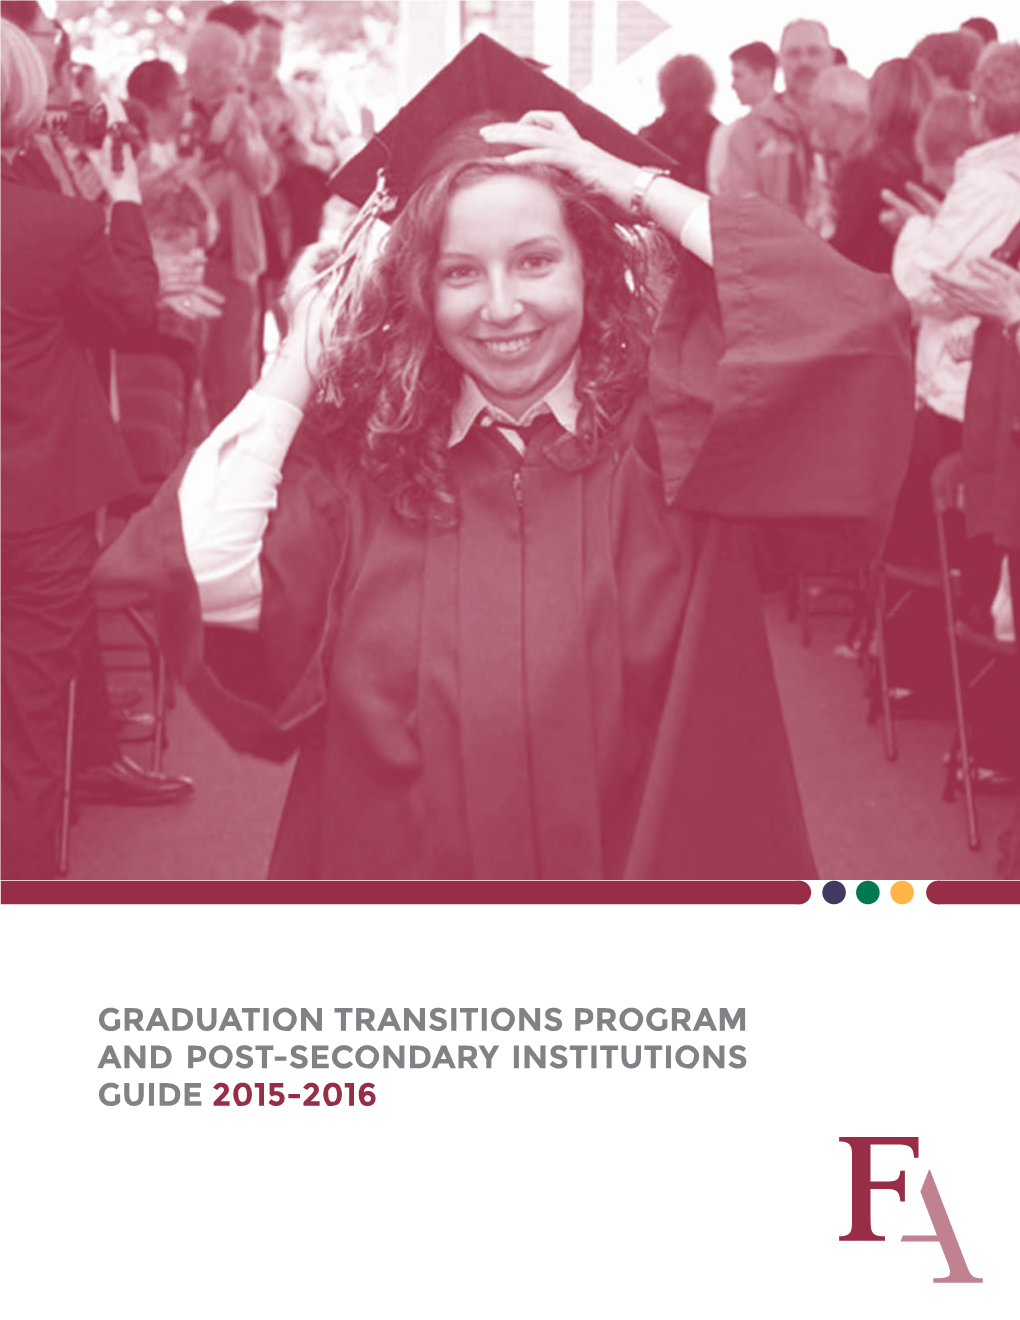 Graduation Transitions Program and Post-Secondary Institutions GUIDE 2015-2016 CHANGING DESTINY by CHANGING MINDS CONTENTS